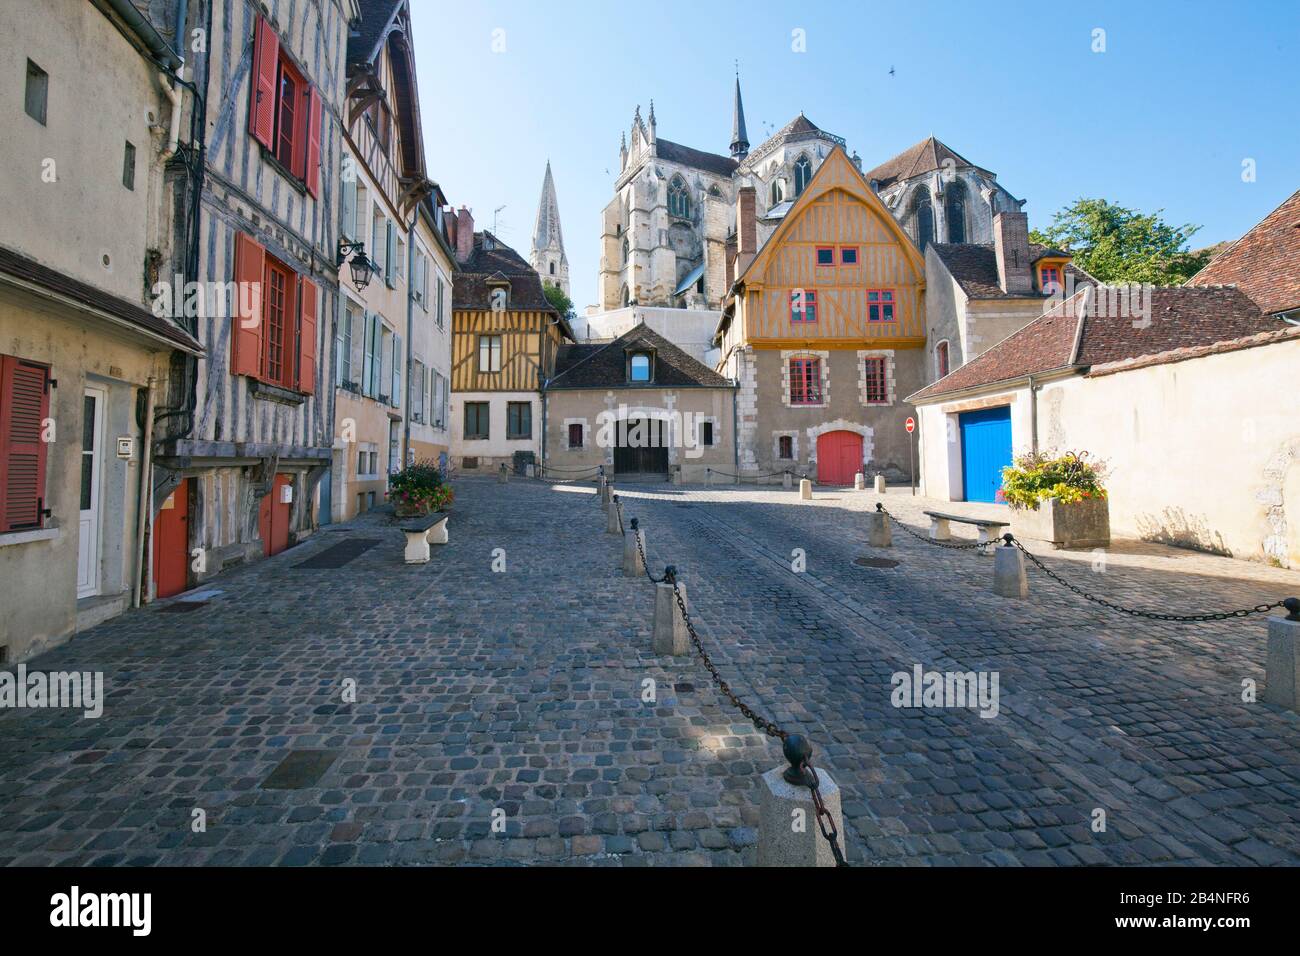 Medieval buildings and half-timbered houses characterize the old town in Auxerre. Capital of the Yonne department in the Bourgogne-Franche-Comté region of France. Stock Photo